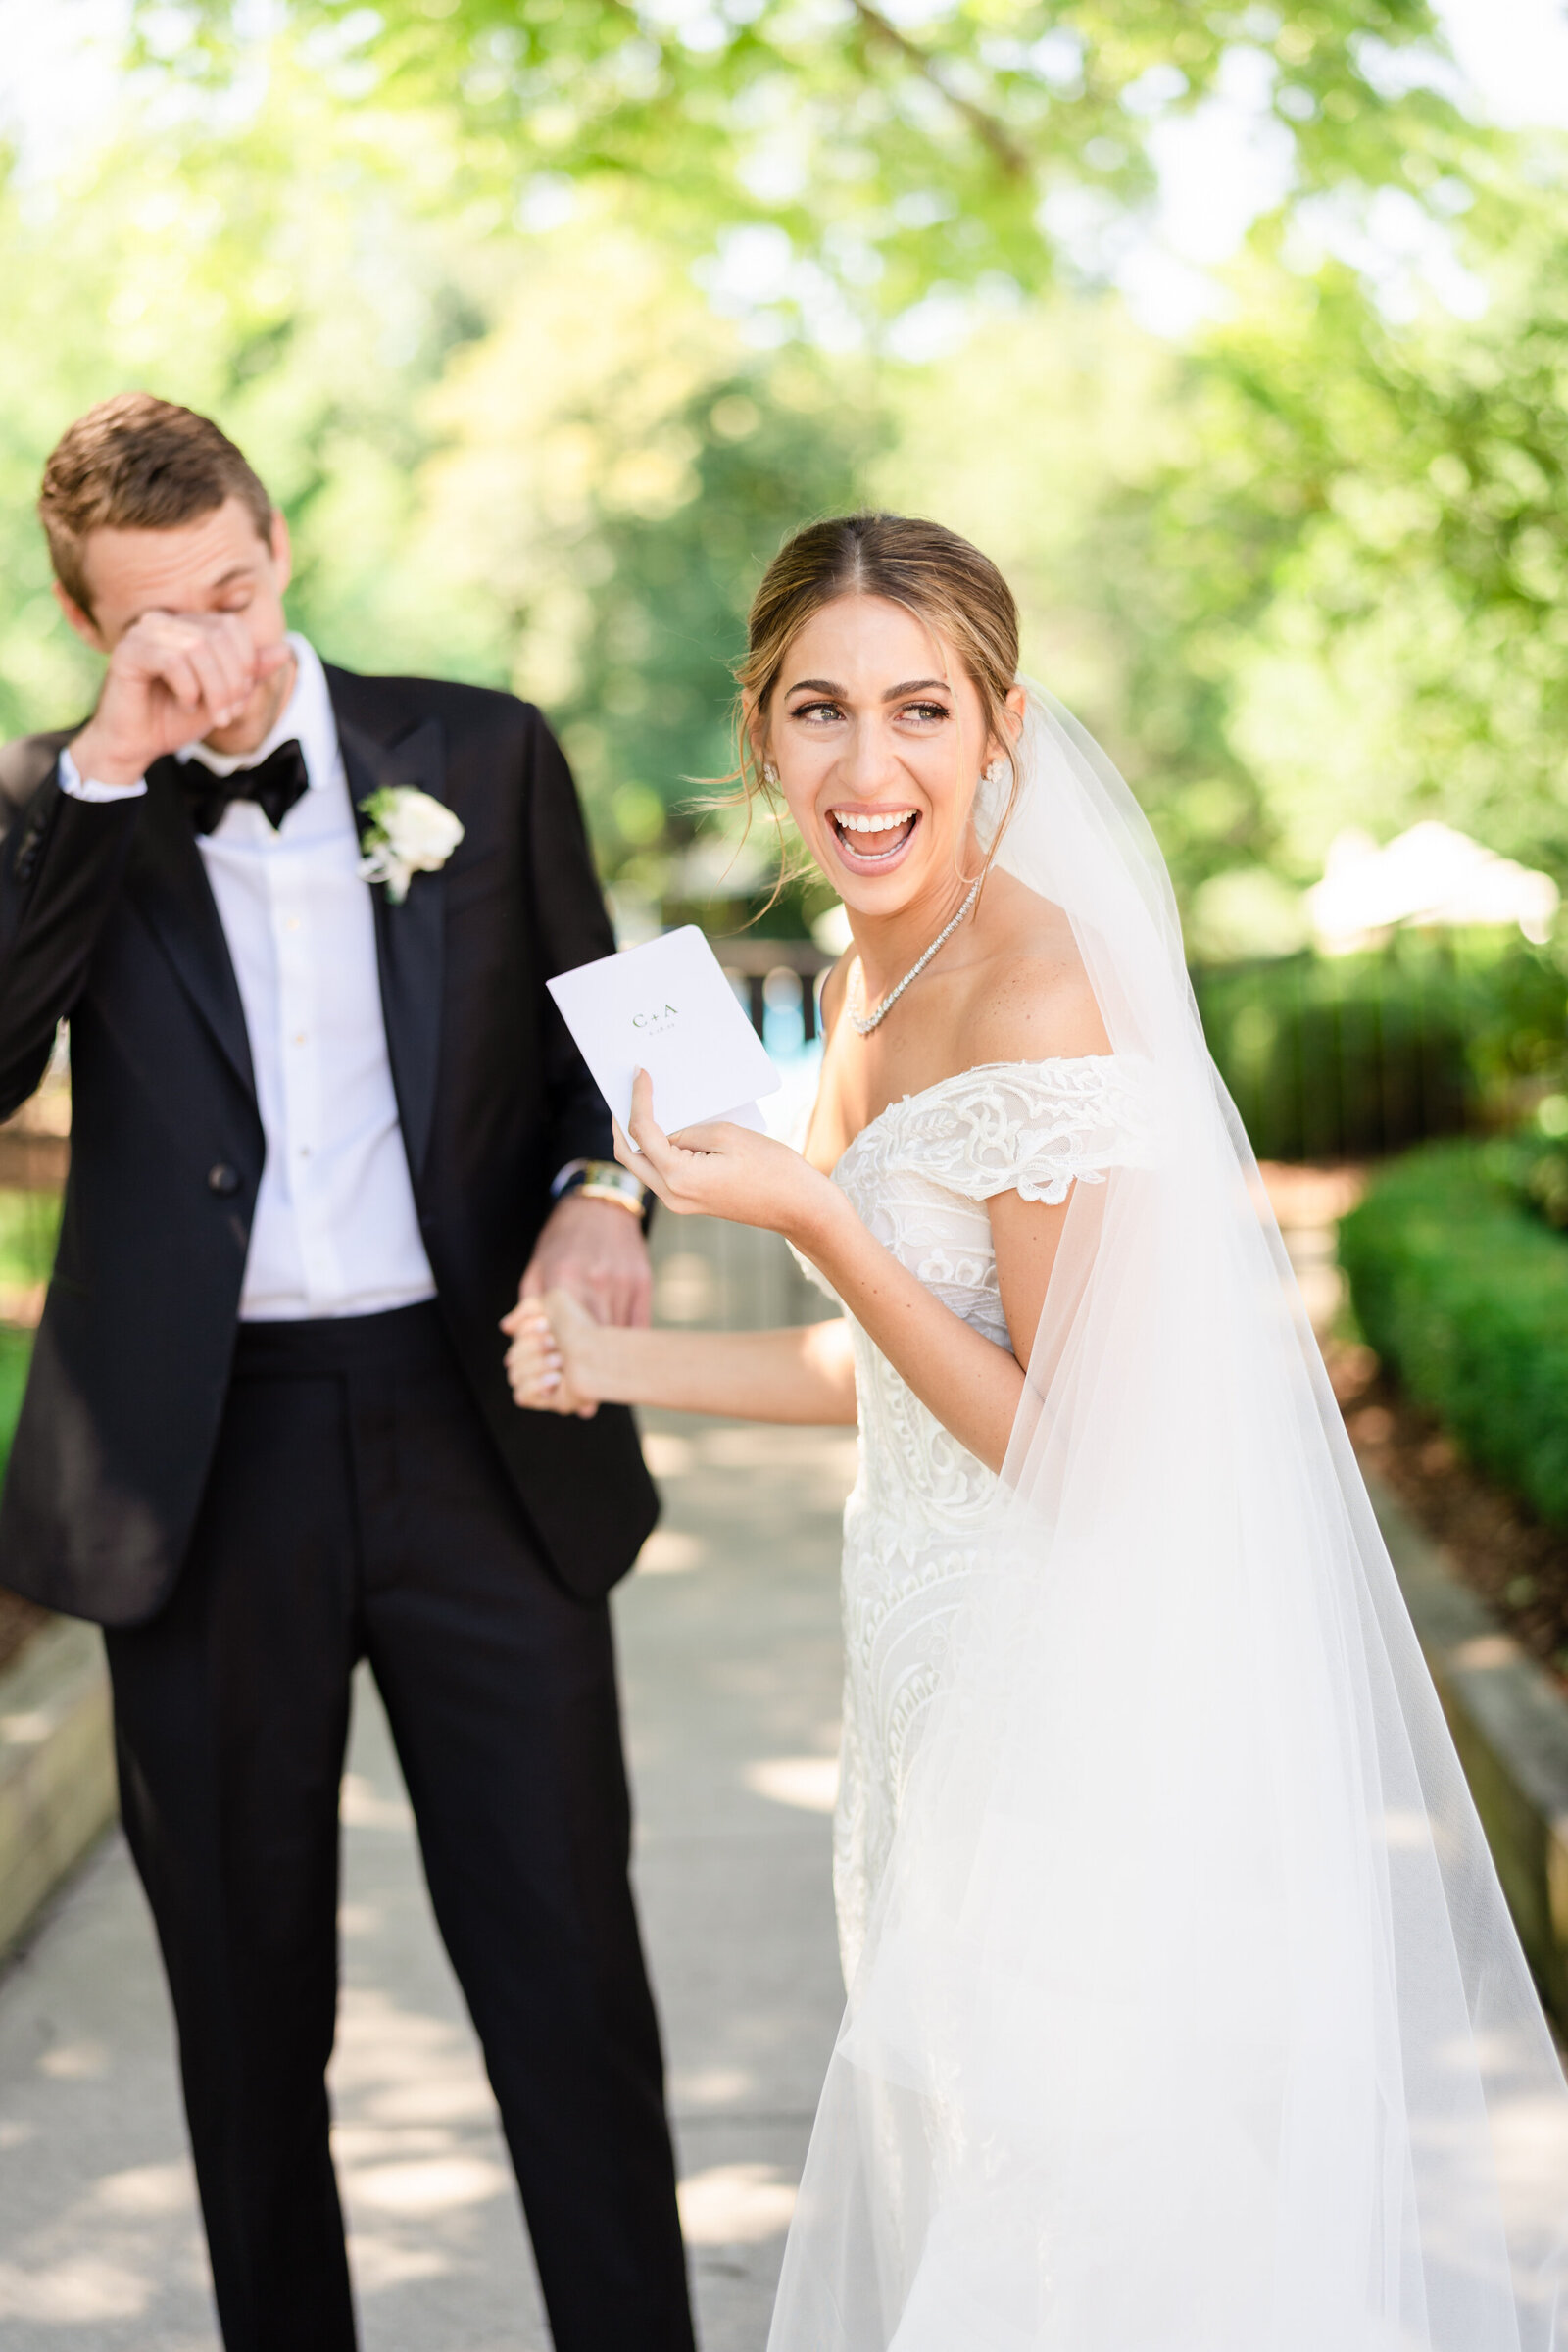 Bride laughs as her groom wipes away a tear during their first look